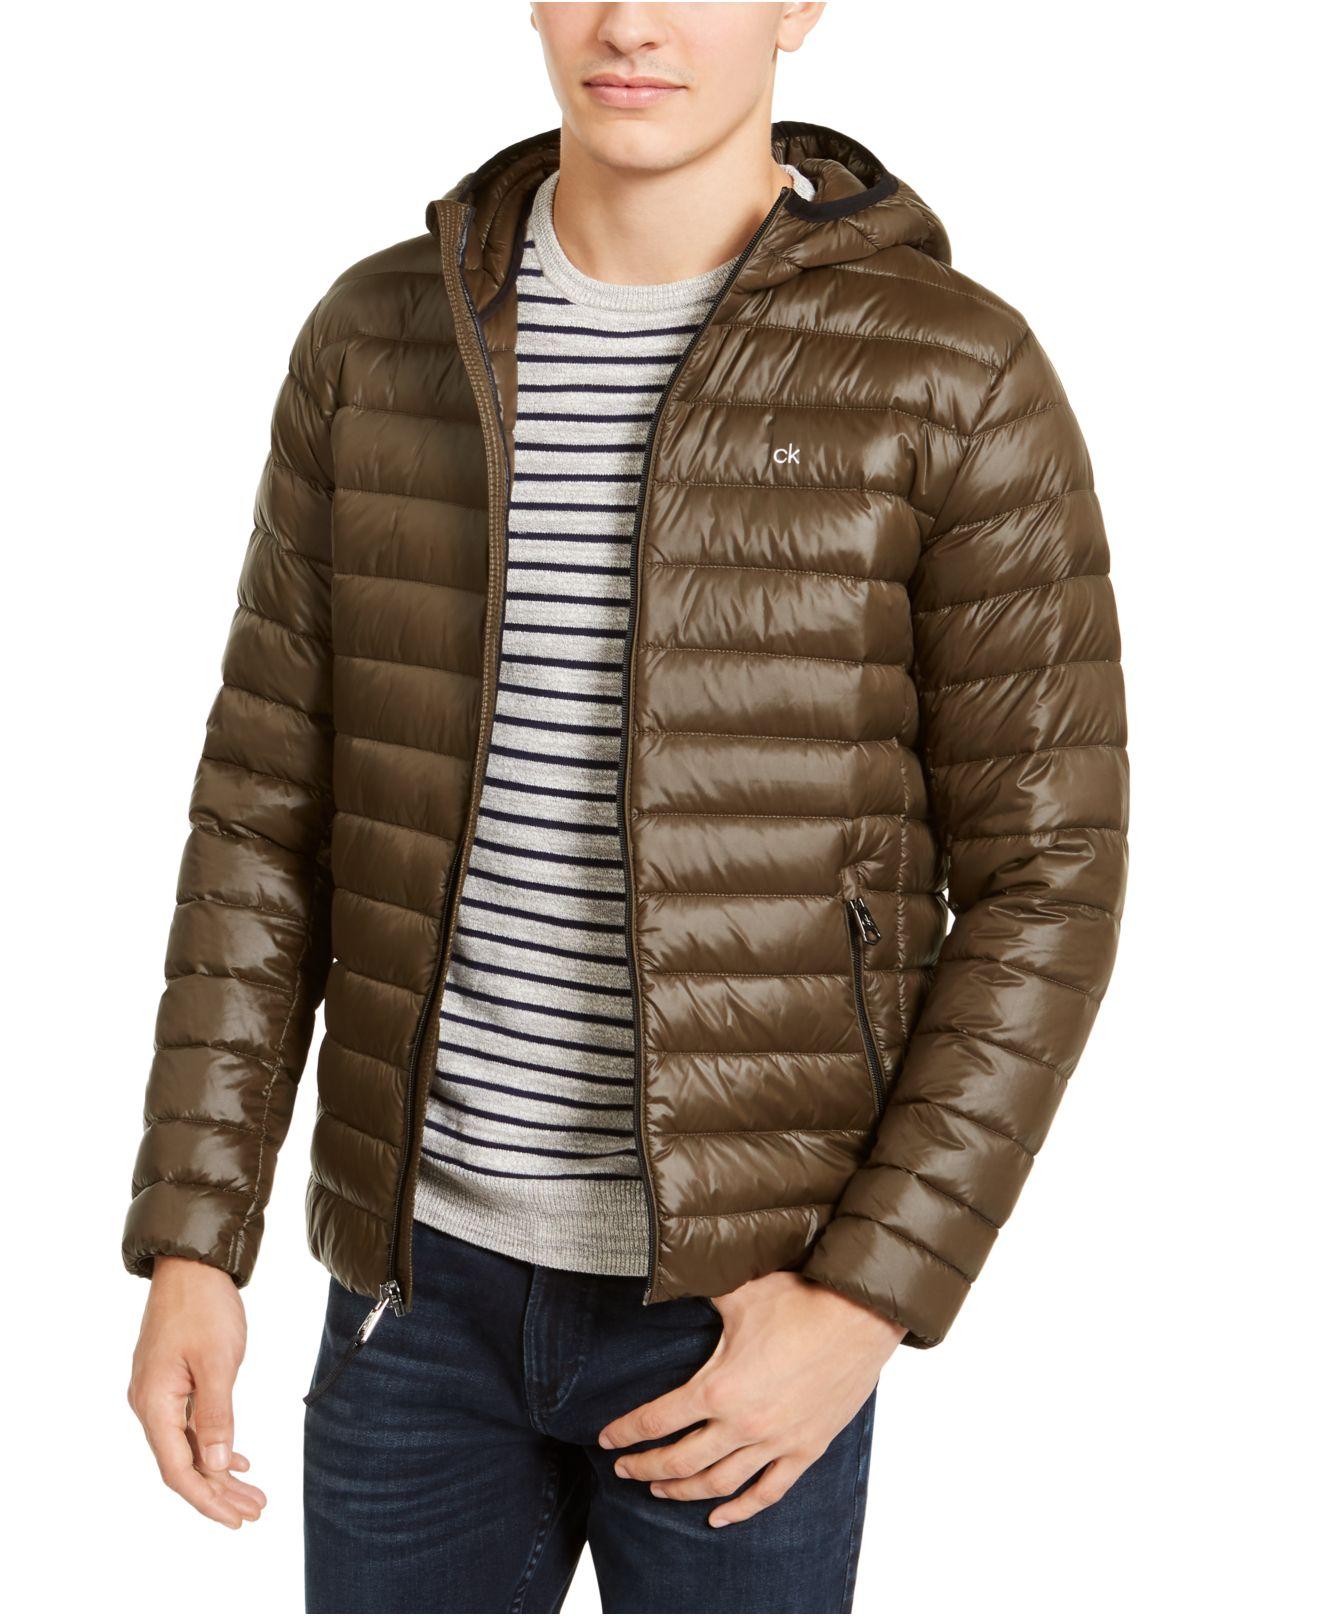 Calvin Klein Hooded Packable Down Jacket, Created For